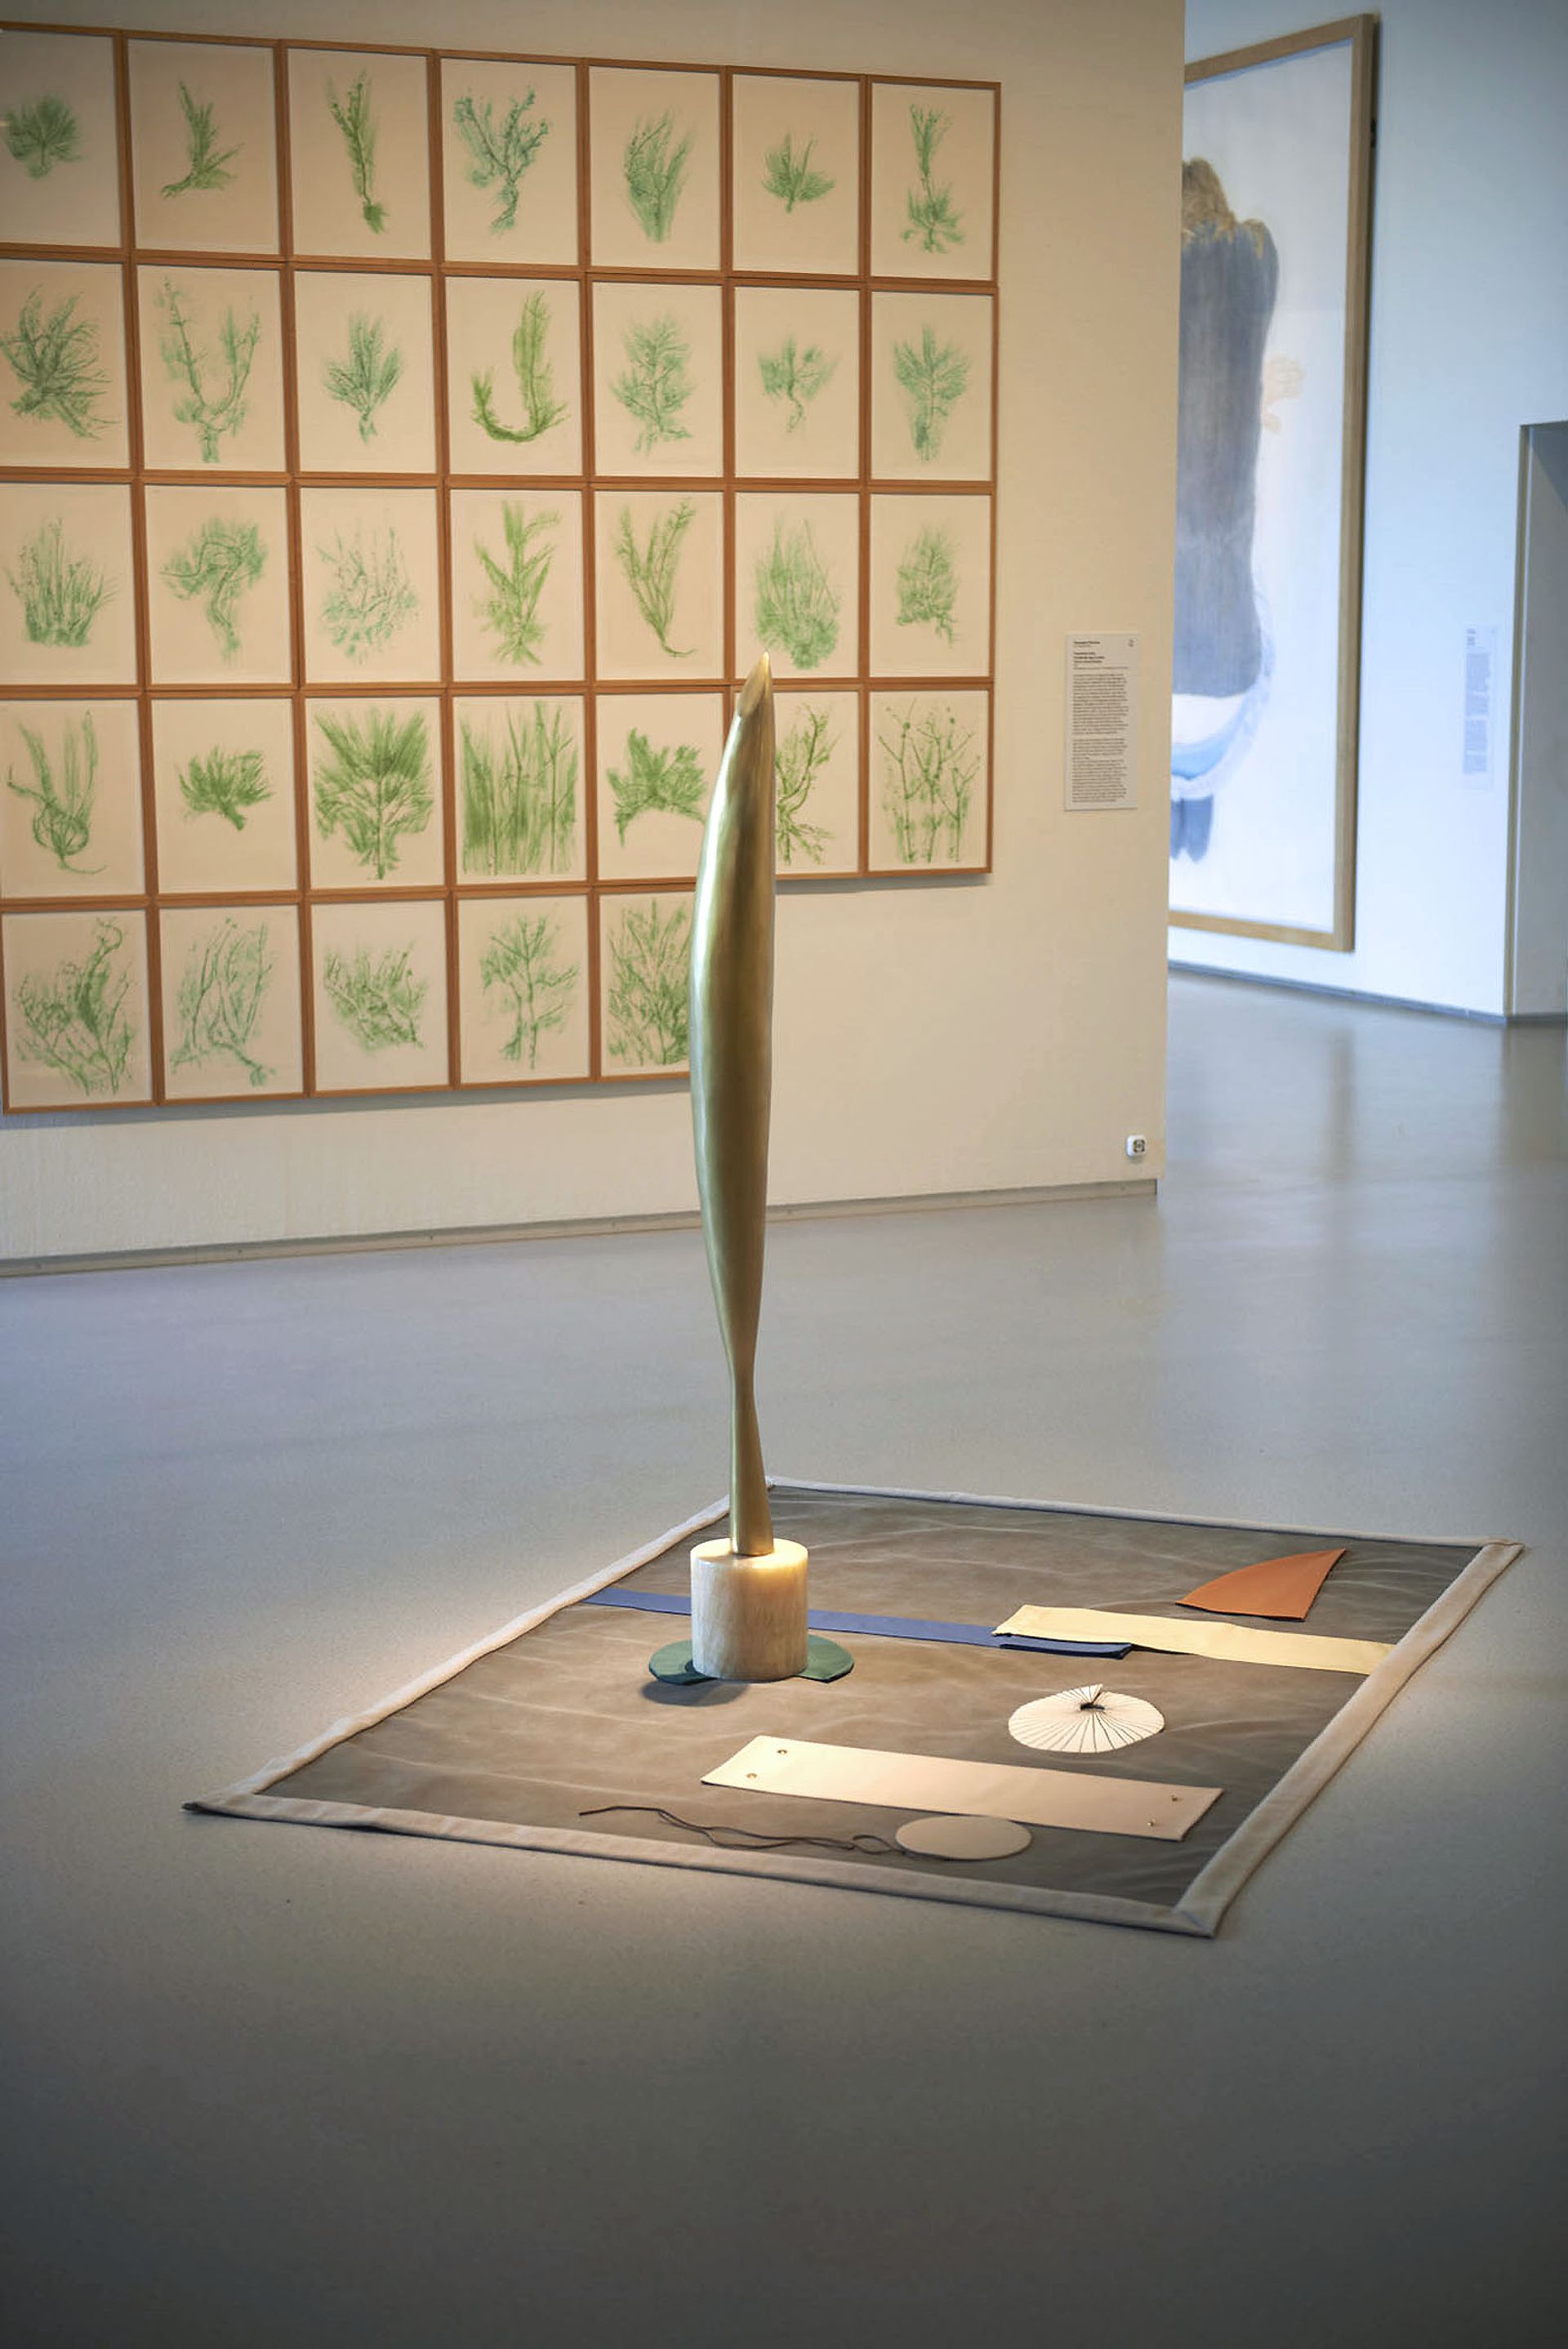 Installation view, 2014, courtesy the artist and Cobra Museum Amstelveen